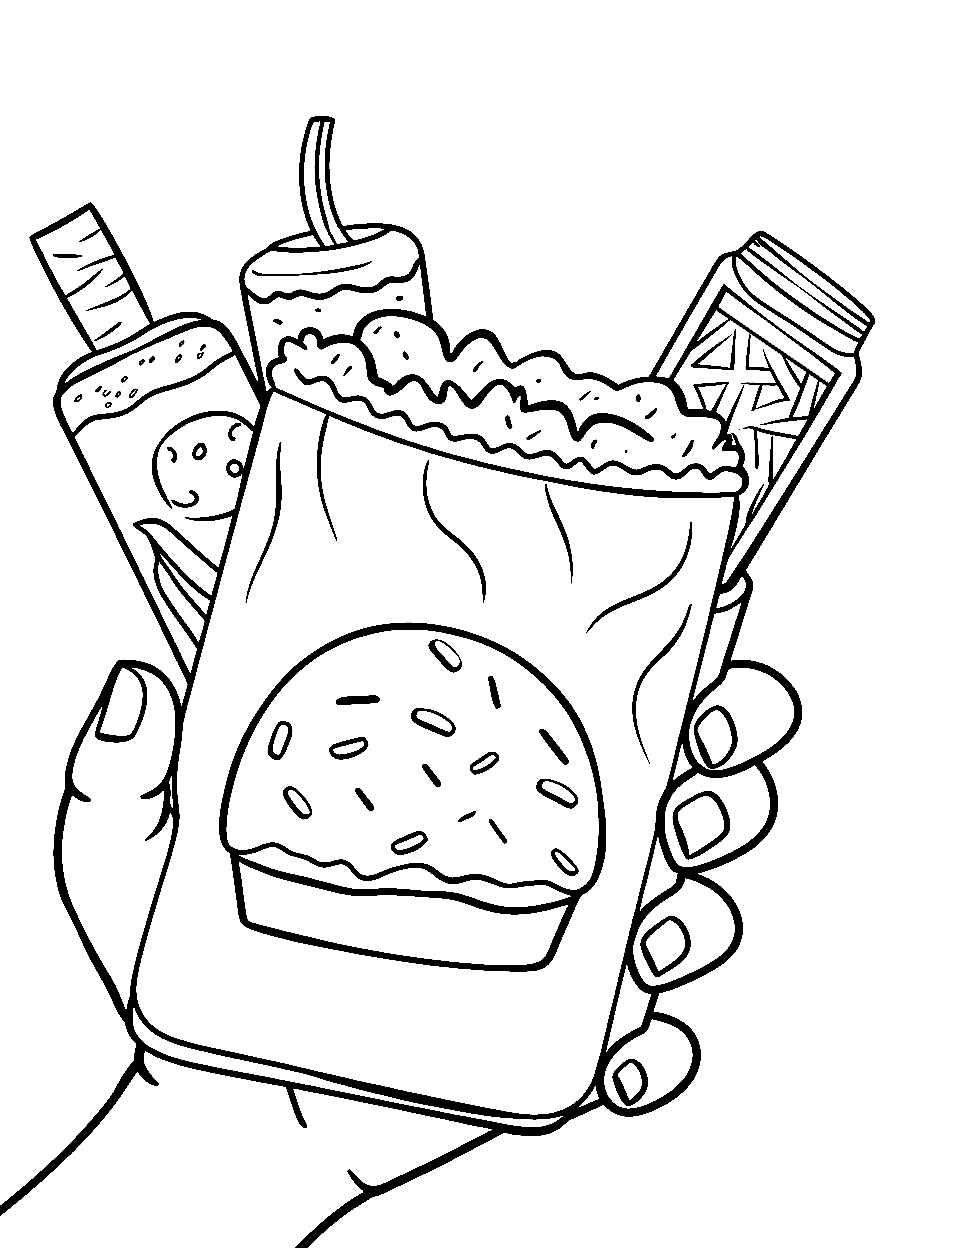 Snacks On the Go Food Coloring Page - A hand holding a bunch of fast food and drink.